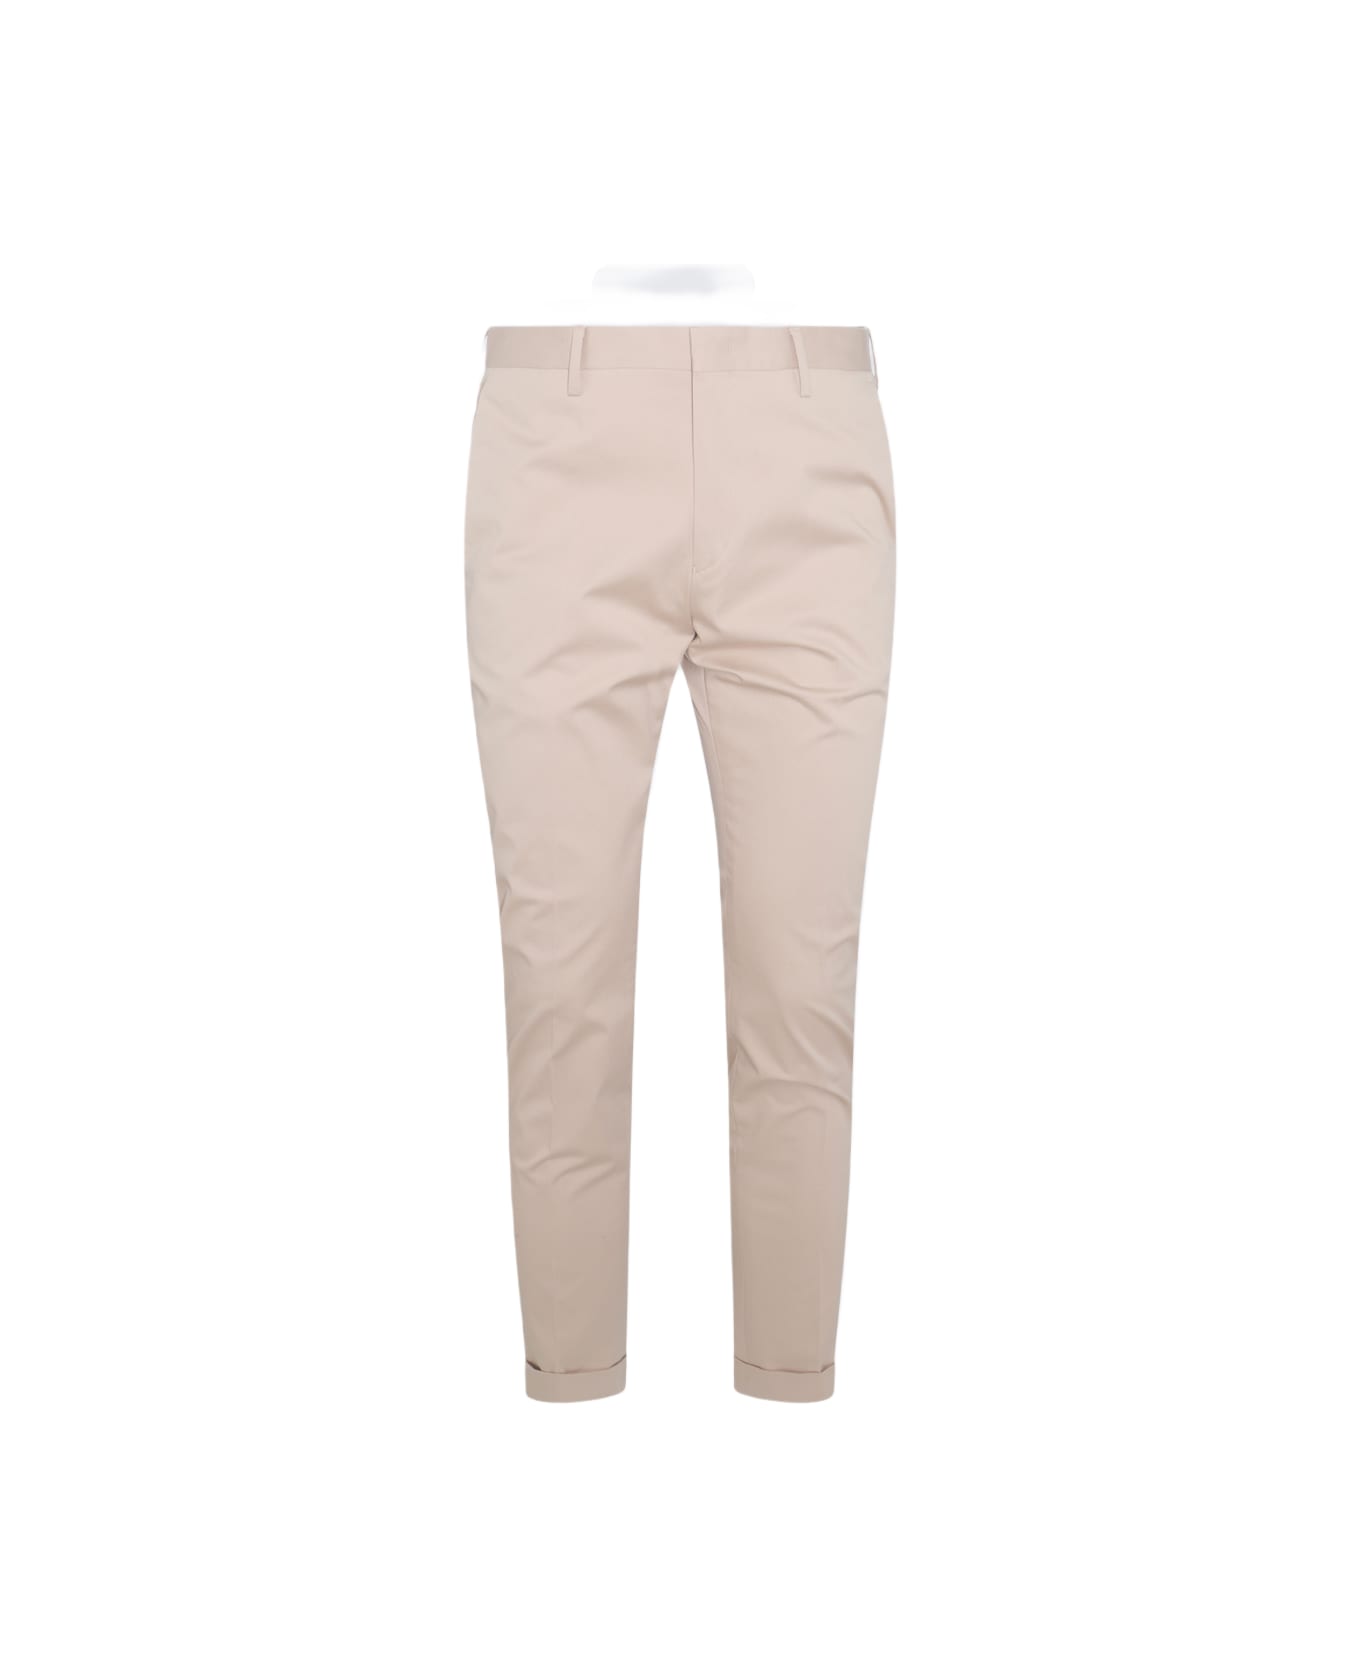 Paul Smith Beige Cotton Blend Trousers - Parc ボトムス